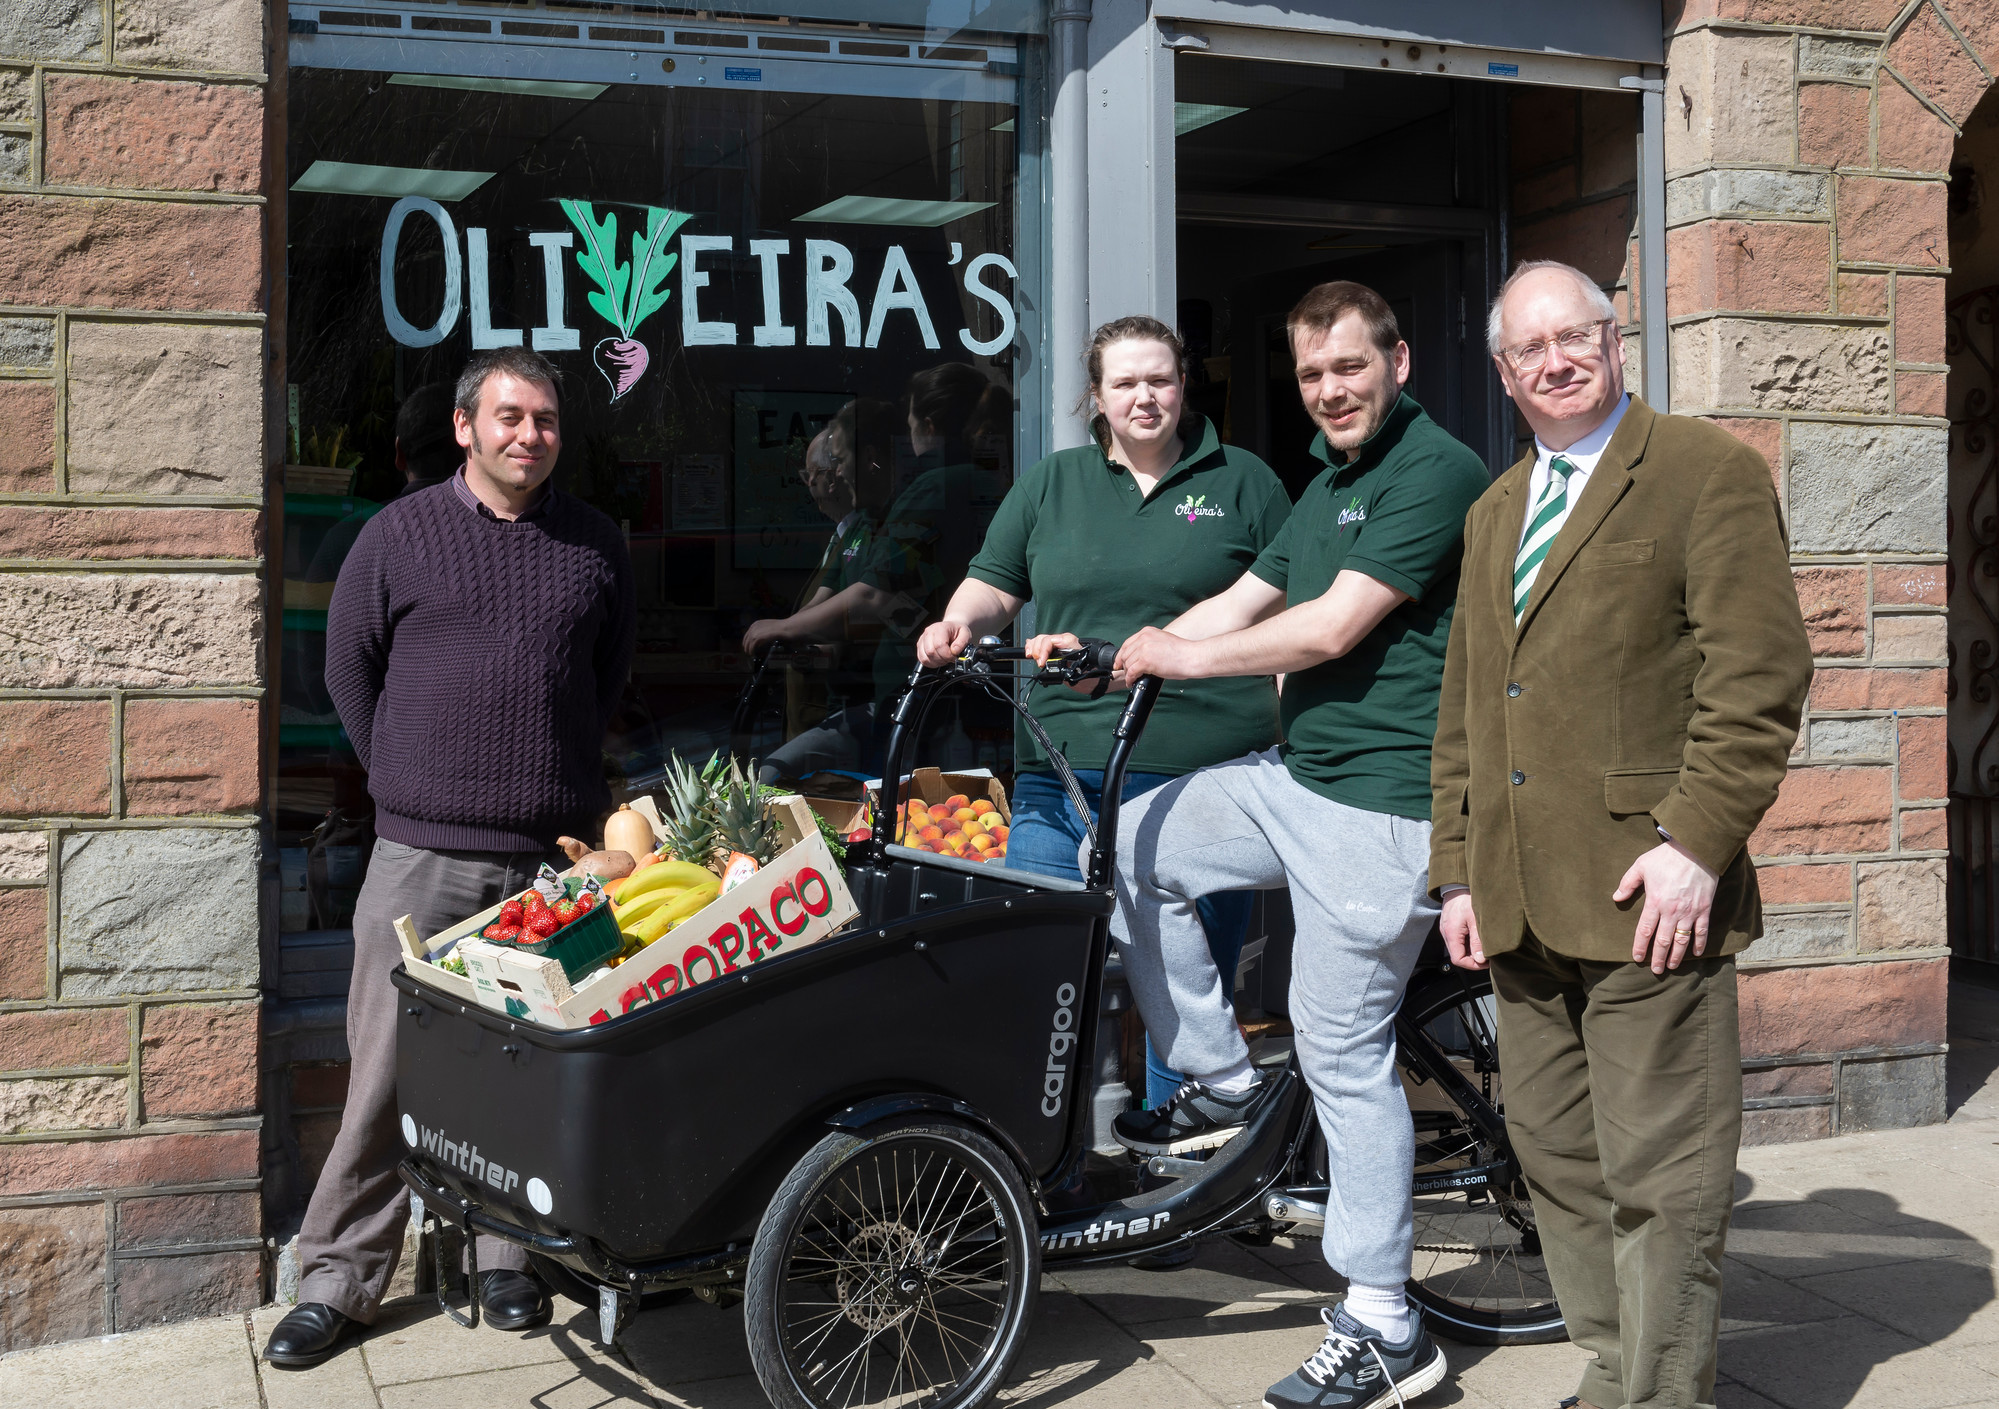 (l-r) Anthony Robertson strategic development officer for Aberdeenshire Council, Cat Henriques De Oliveira, Antero Henriques De Oliveira and Cllr Glenn Reynolds with the Electric cargo bike outside Oliveira’s greengrocer in Banff